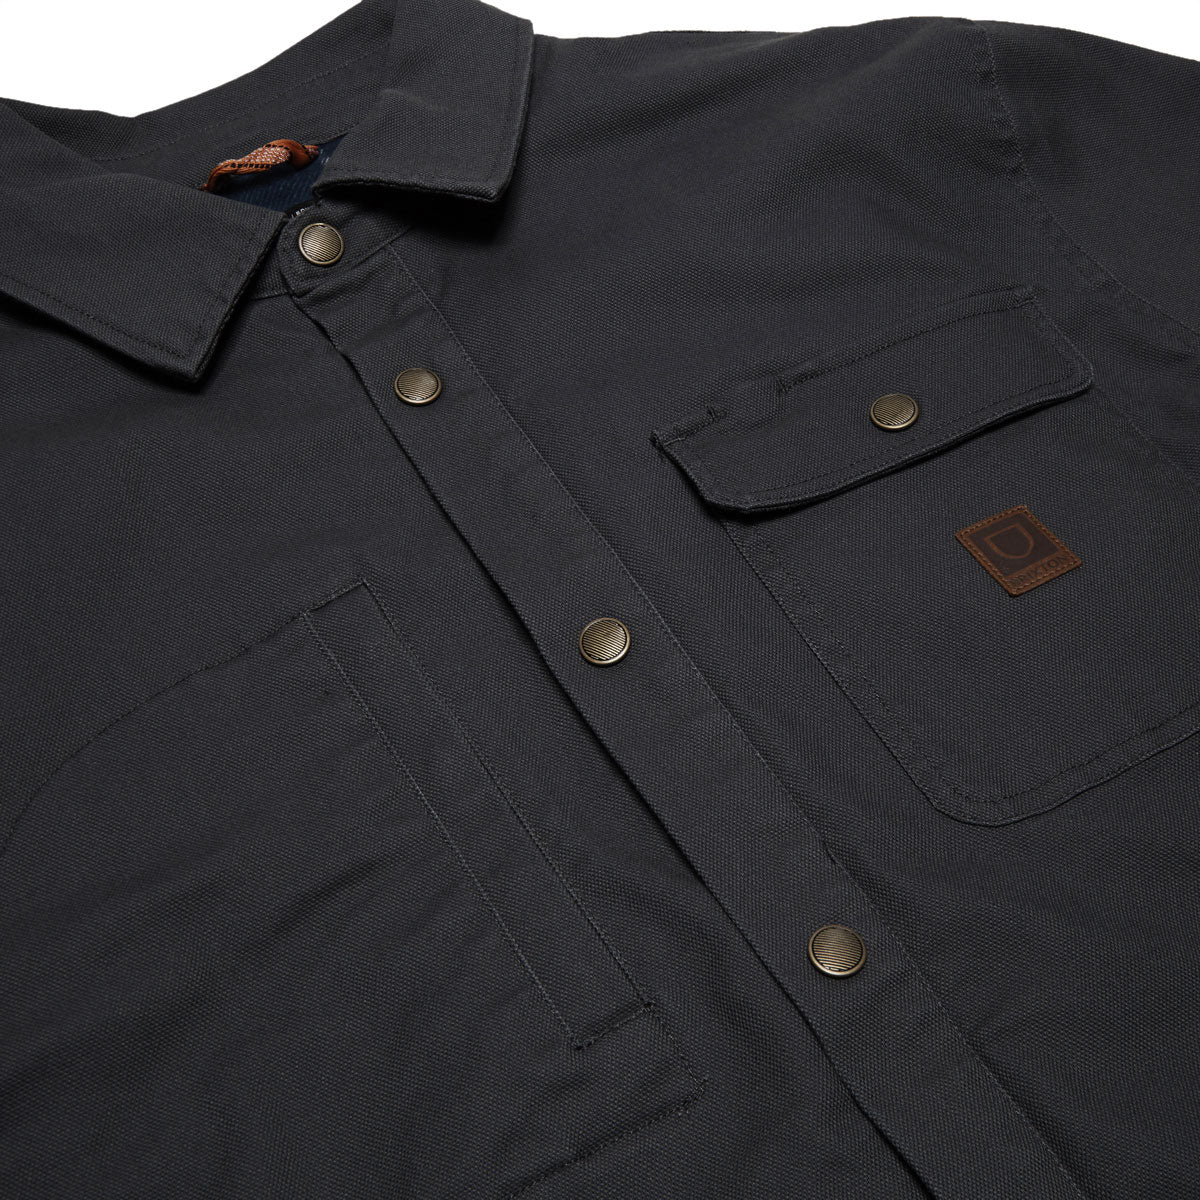 BRIXTON BUILDERS LINED JACKET OMBRE BLUE - The Drive Skateshop